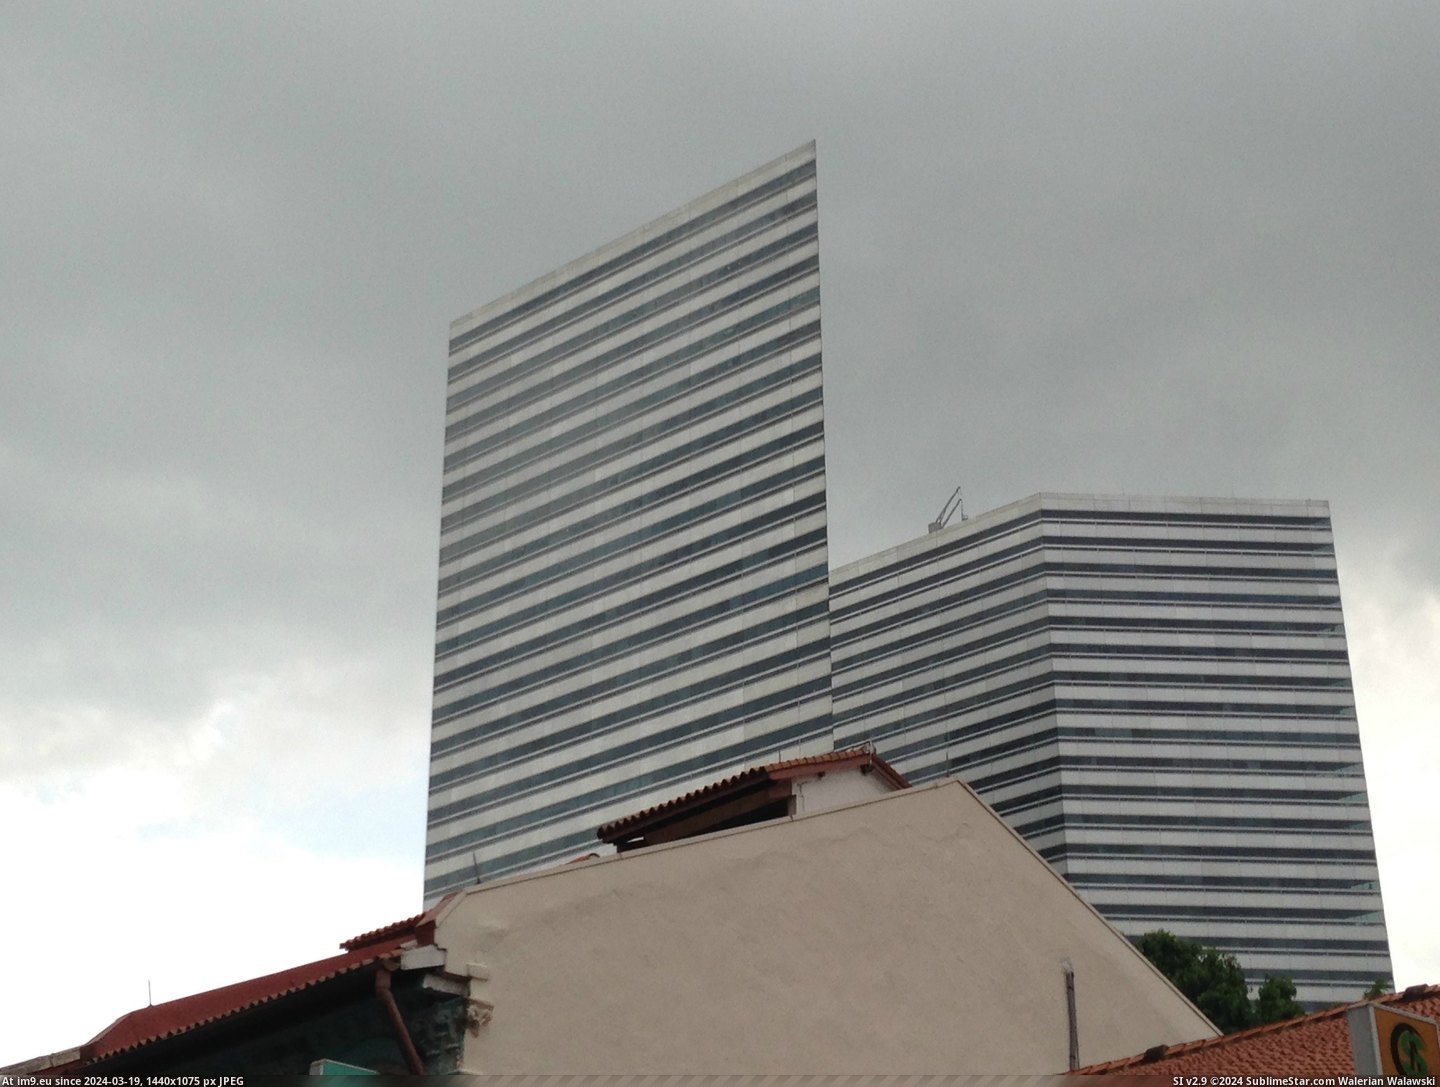 #Building #Dimensional #Highrise #Completely [Mildlyinteresting] This highrise building looks completely 2-dimensional Pic. (Image of album My r/MILDLYINTERESTING favs))